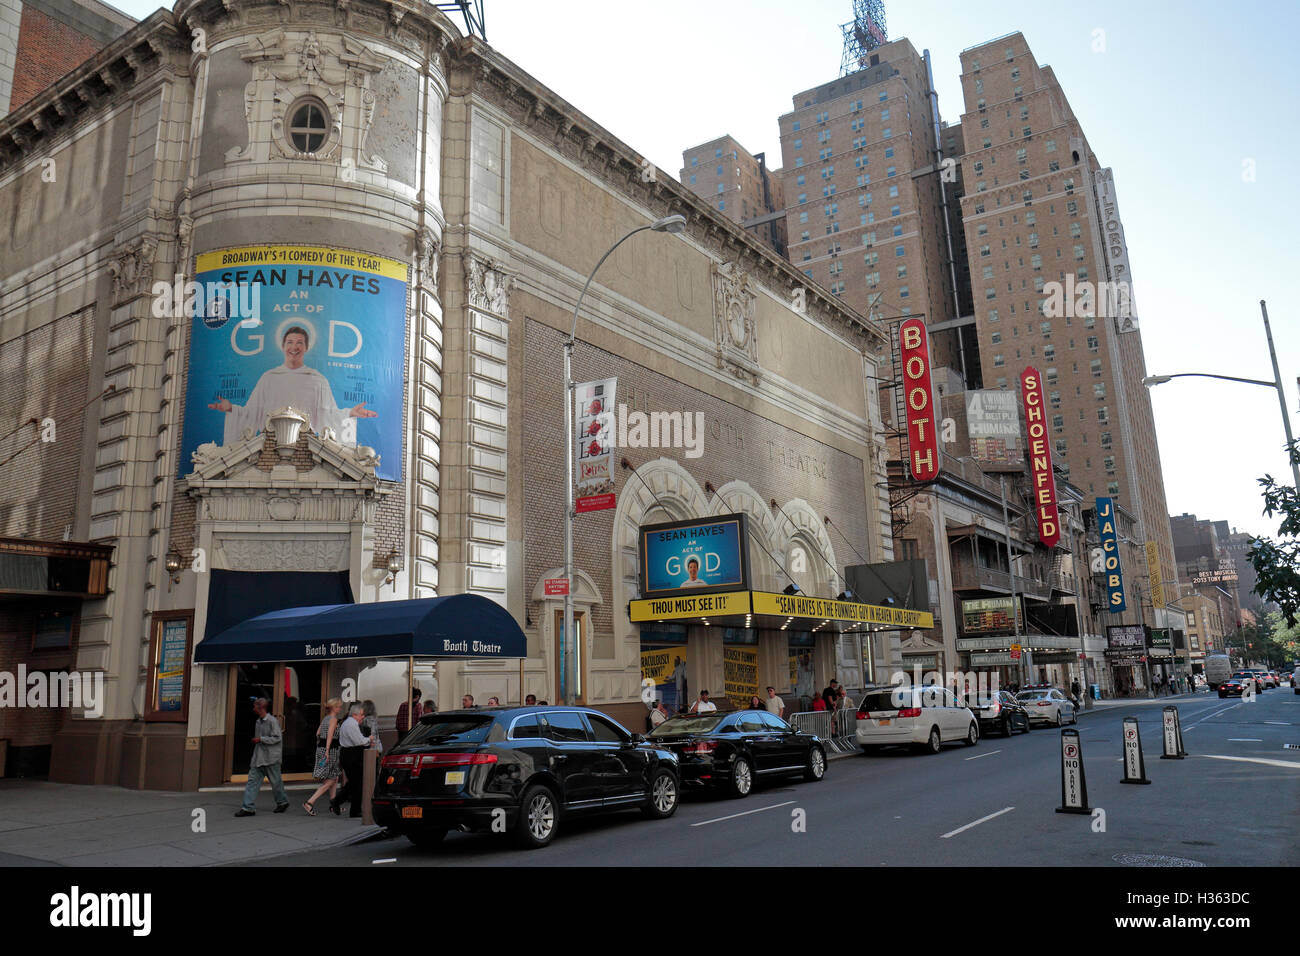 The Booth Broadway theater showing Sean Hayes in 'An Act of God', West 45th Street, Manhattan, New York, United States. Stock Photo